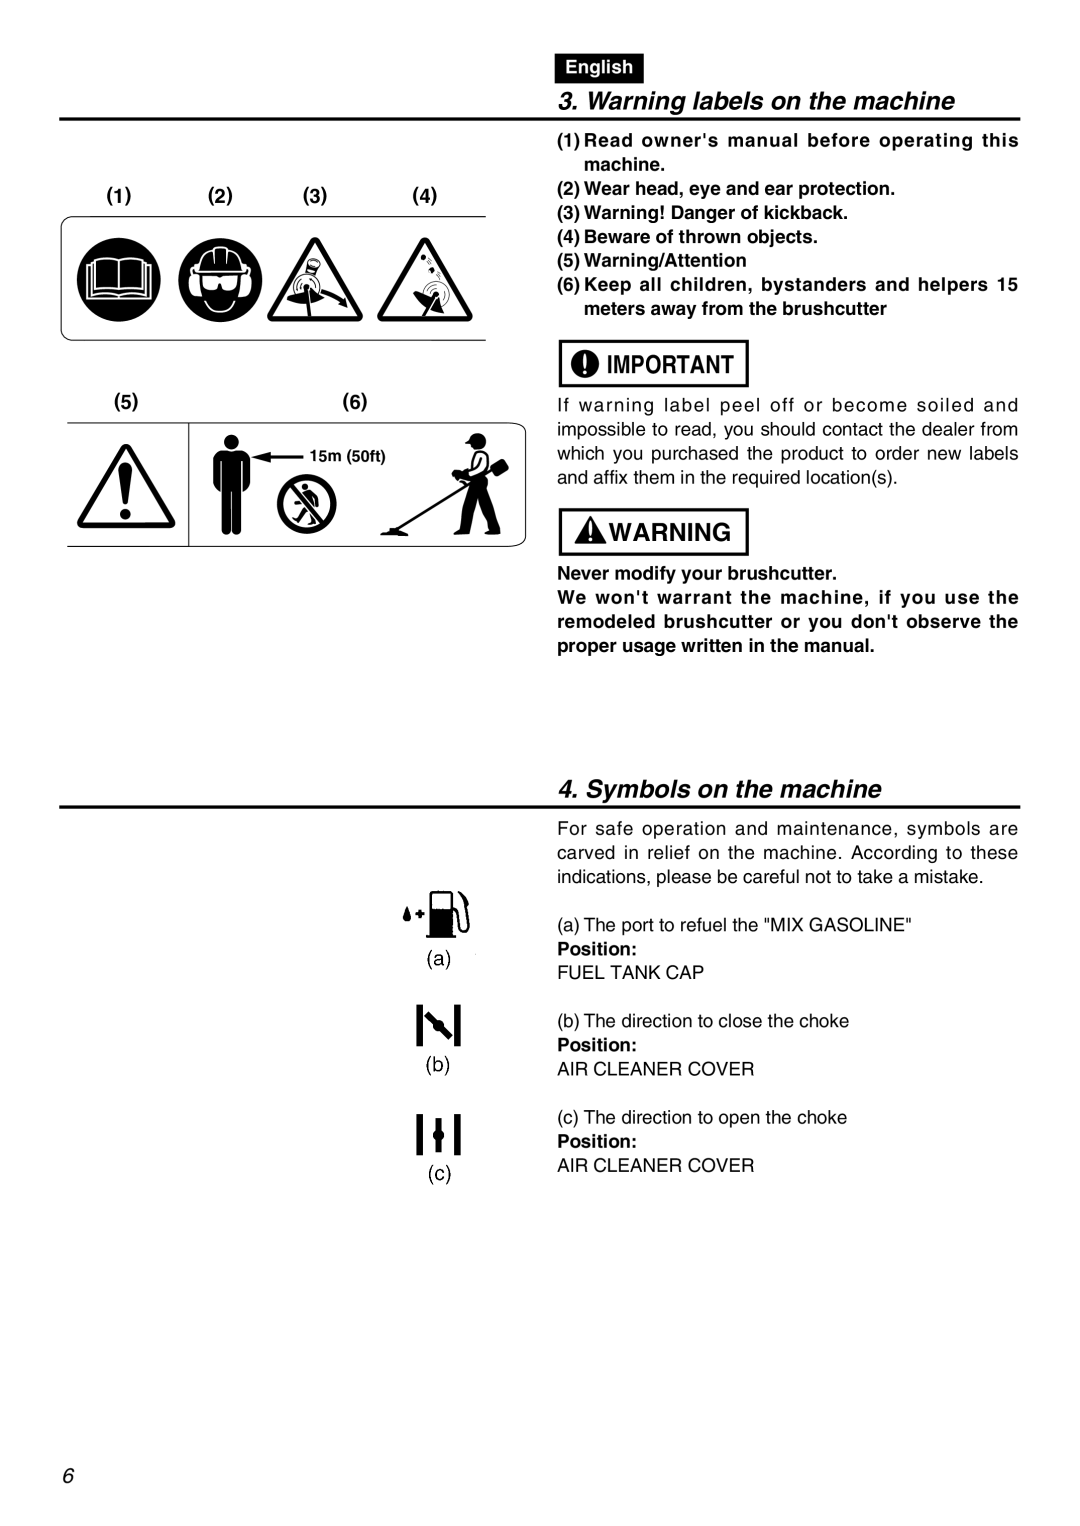 RedMax BCZ2401S-CA manual Warning labels on the machine, Symbols on the machine, 1 2 3, English 